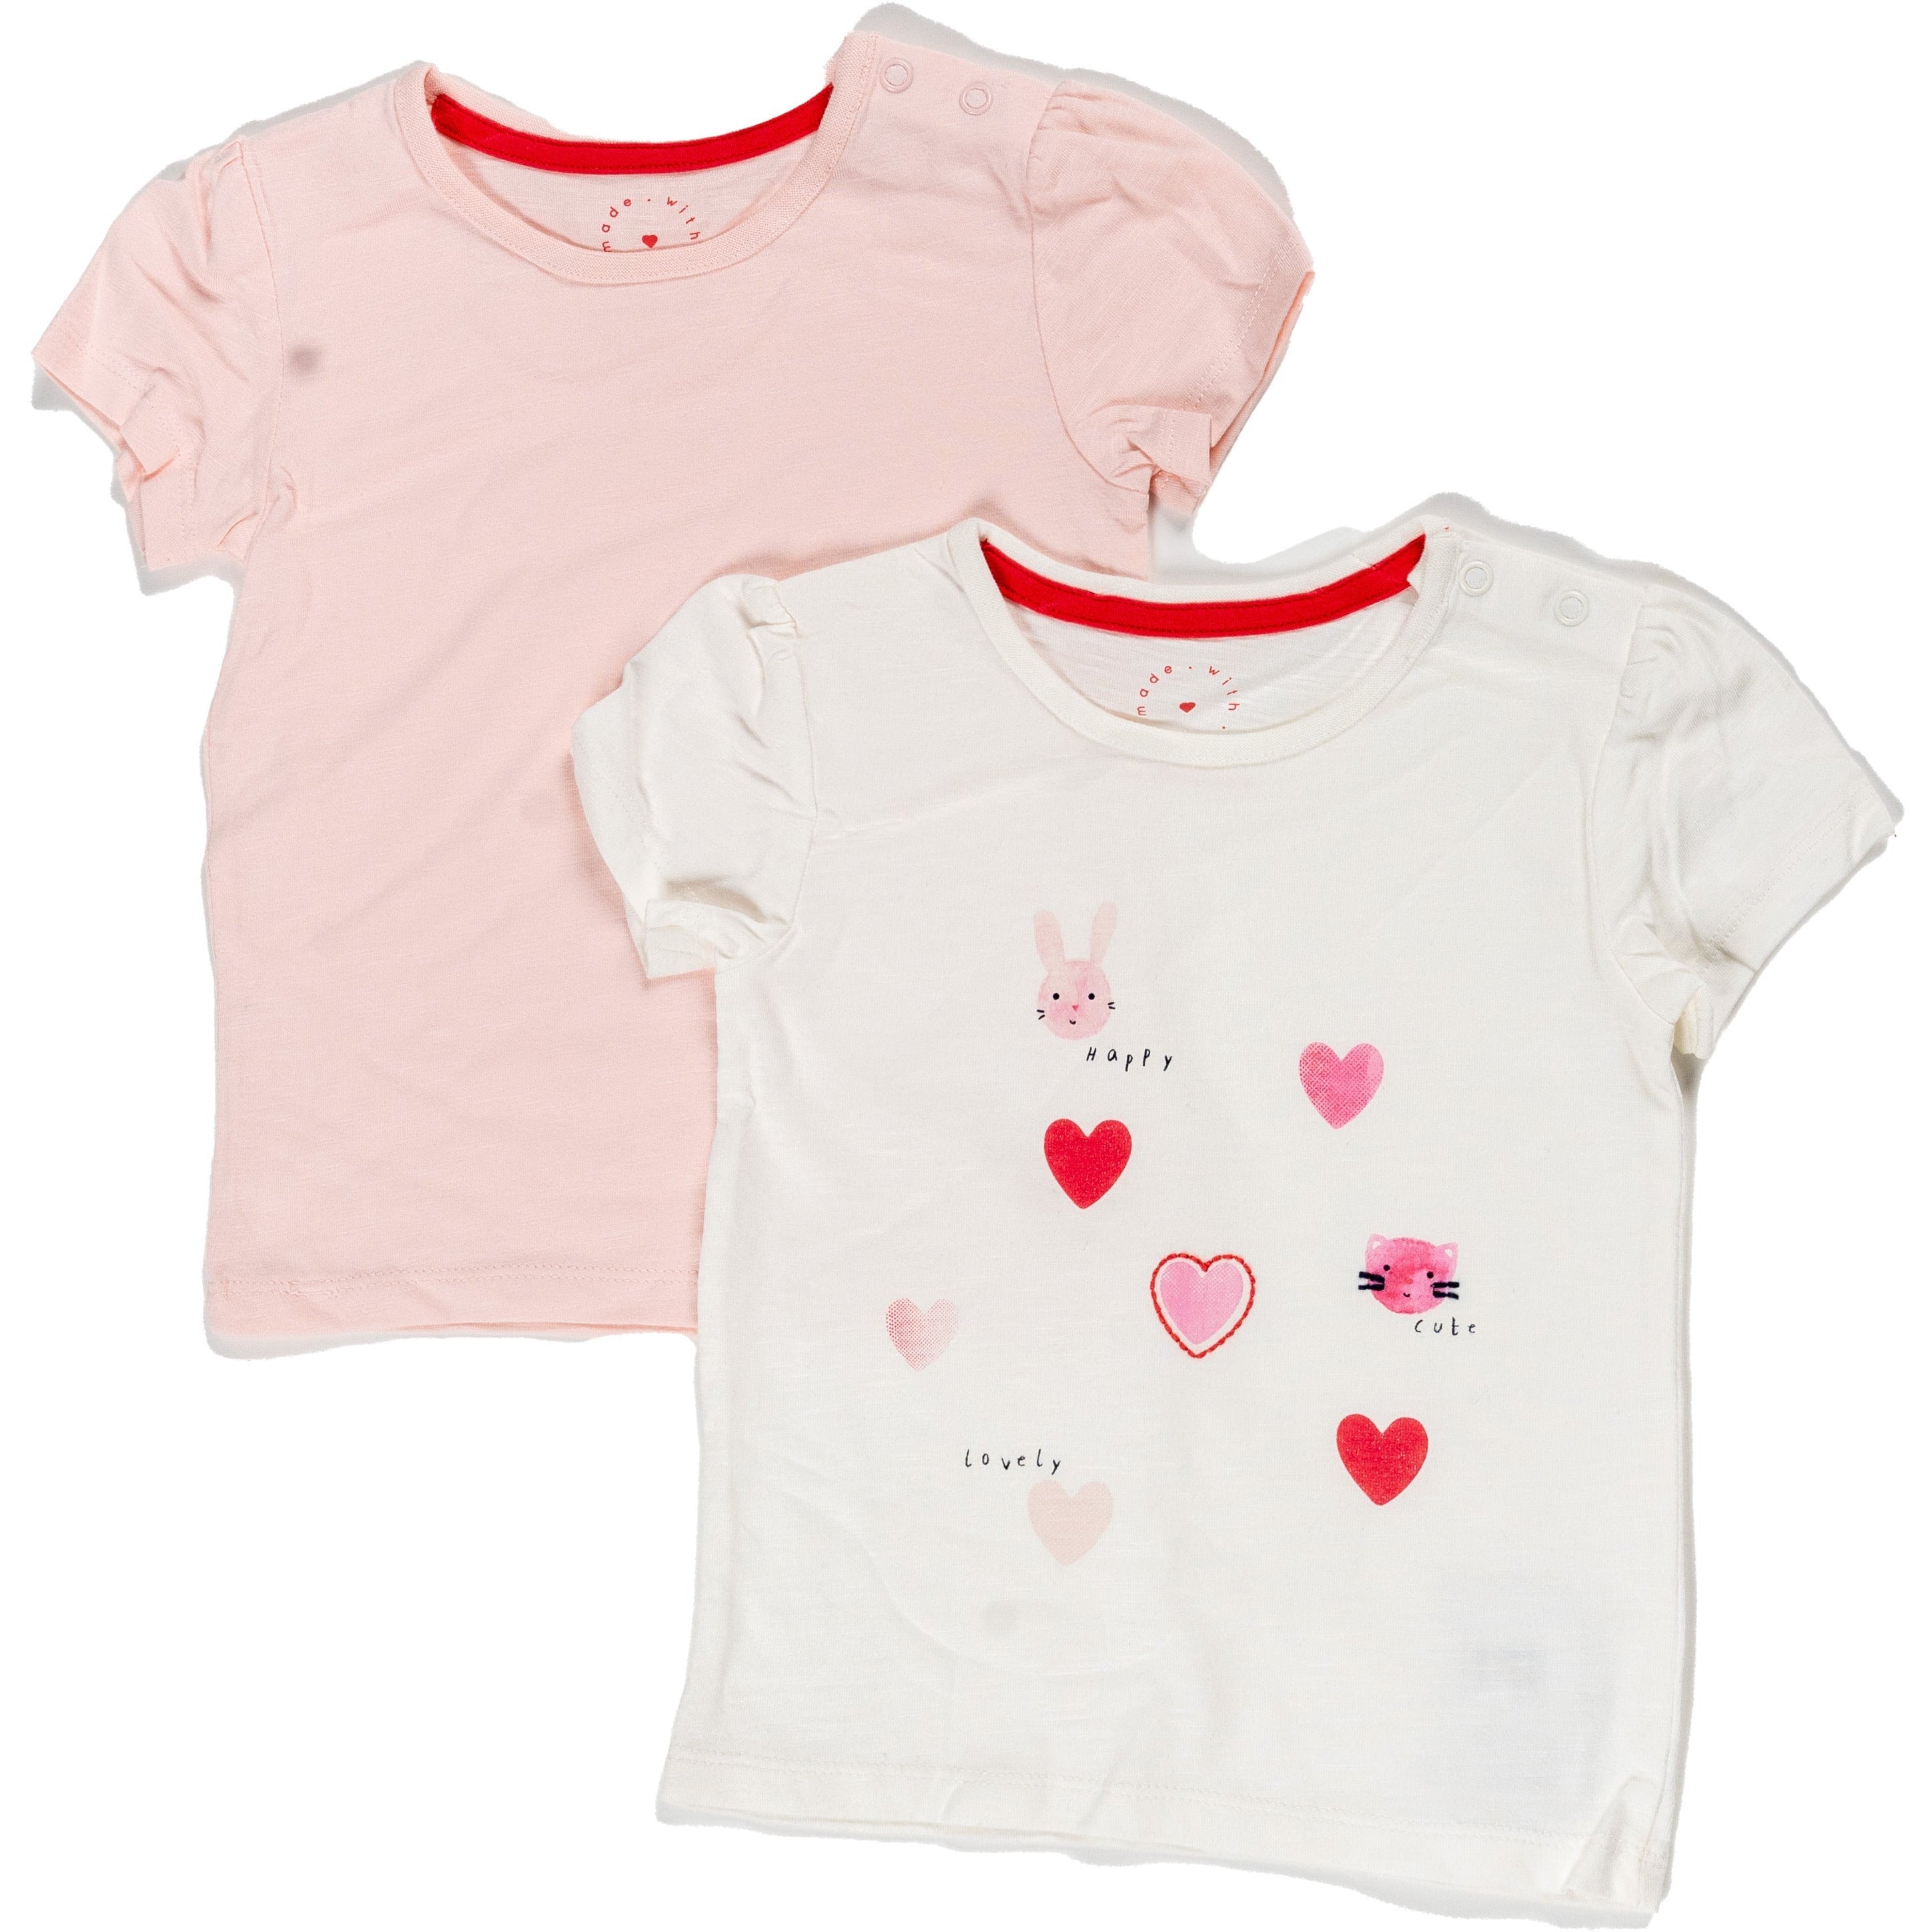 Mothercare Pink Purfect Tshirt Set of 2 A500 Age- 9 Months to 24 Months